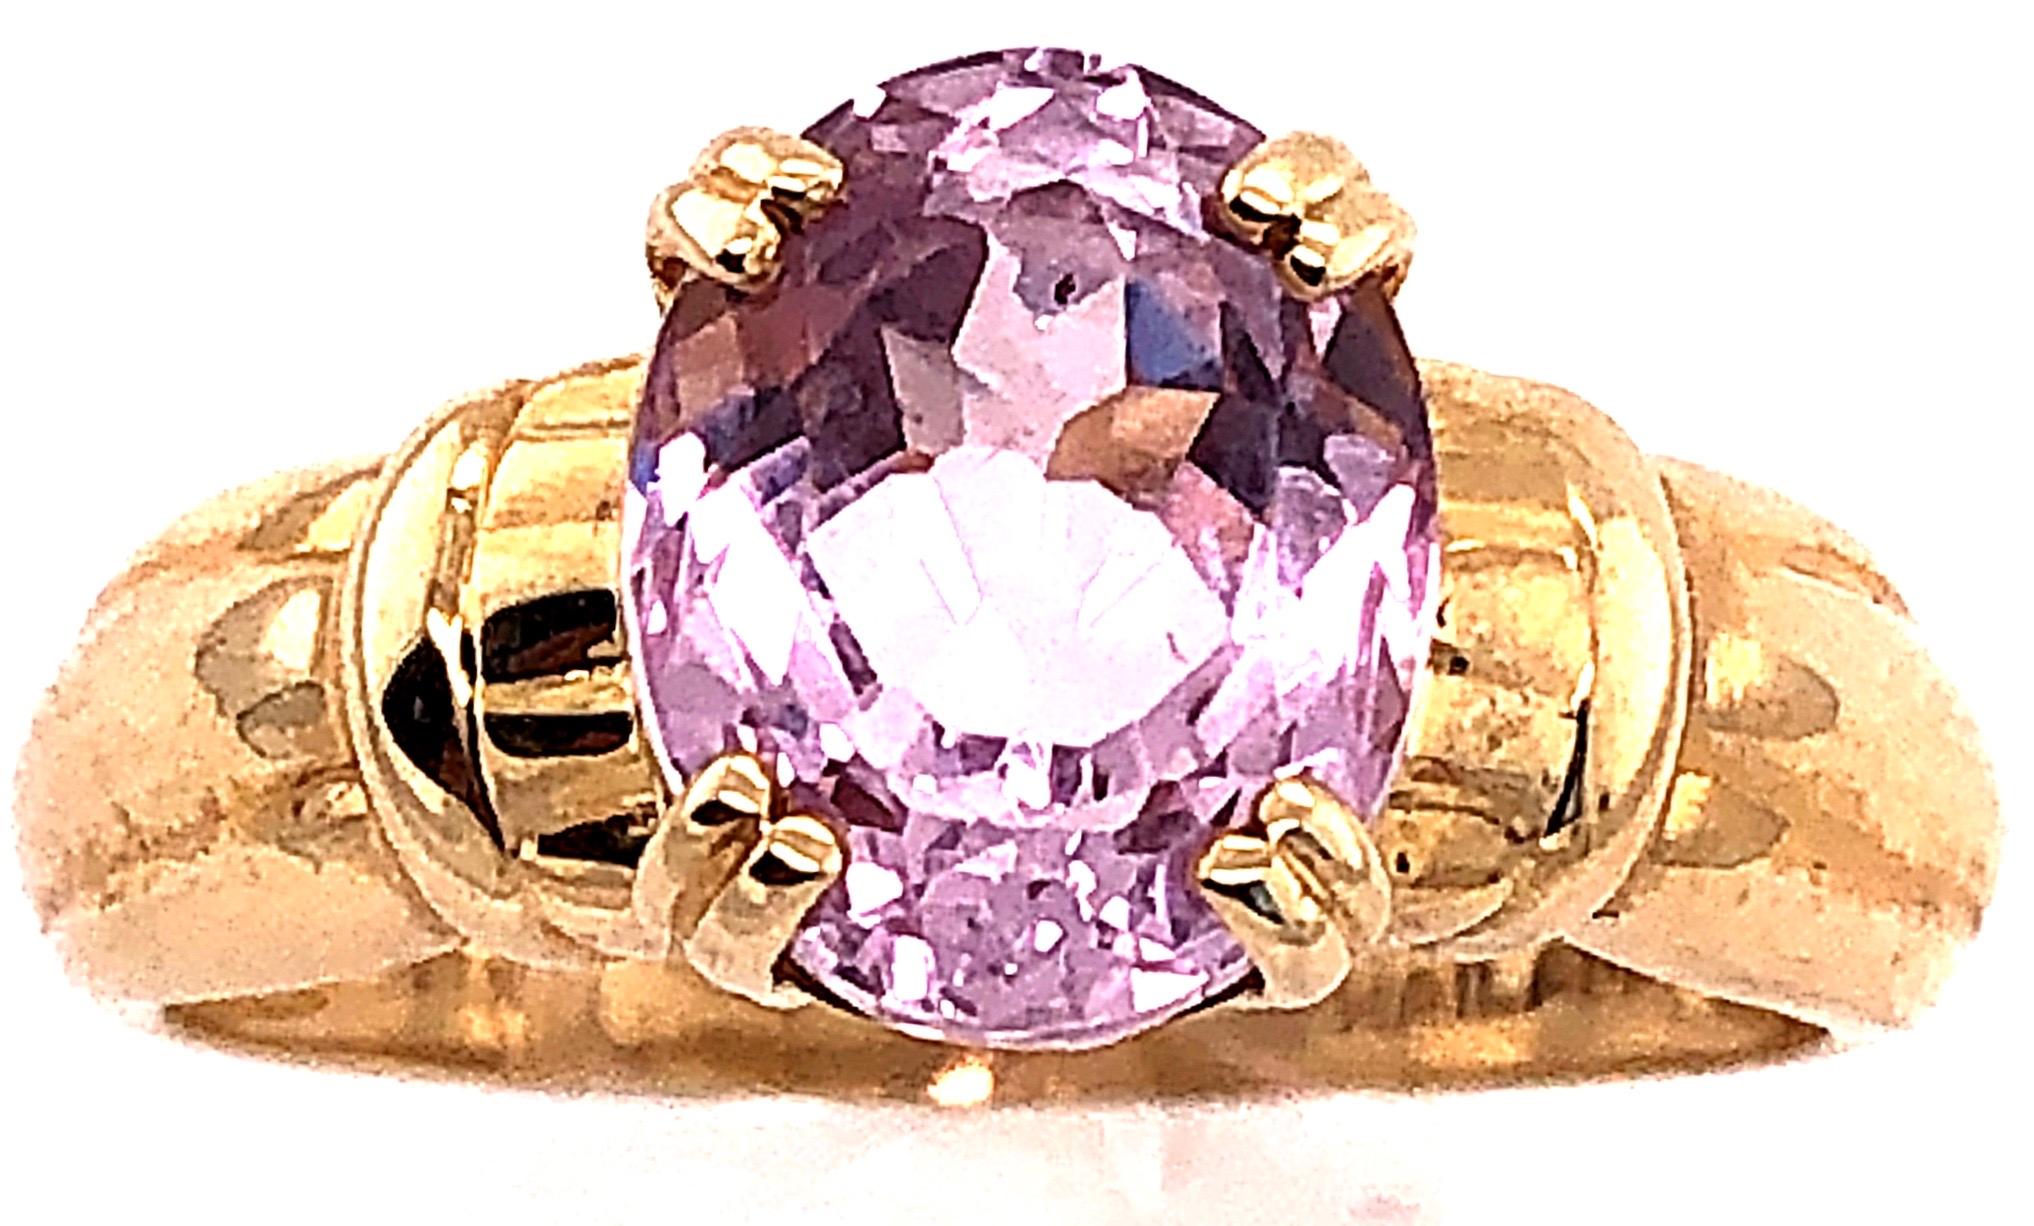 14 Karat Yellow Gold Fashion Oval Amethyst Ring Size 8.
10.00 mm x 8.00 mm amethyst
3.65 grams total weight.